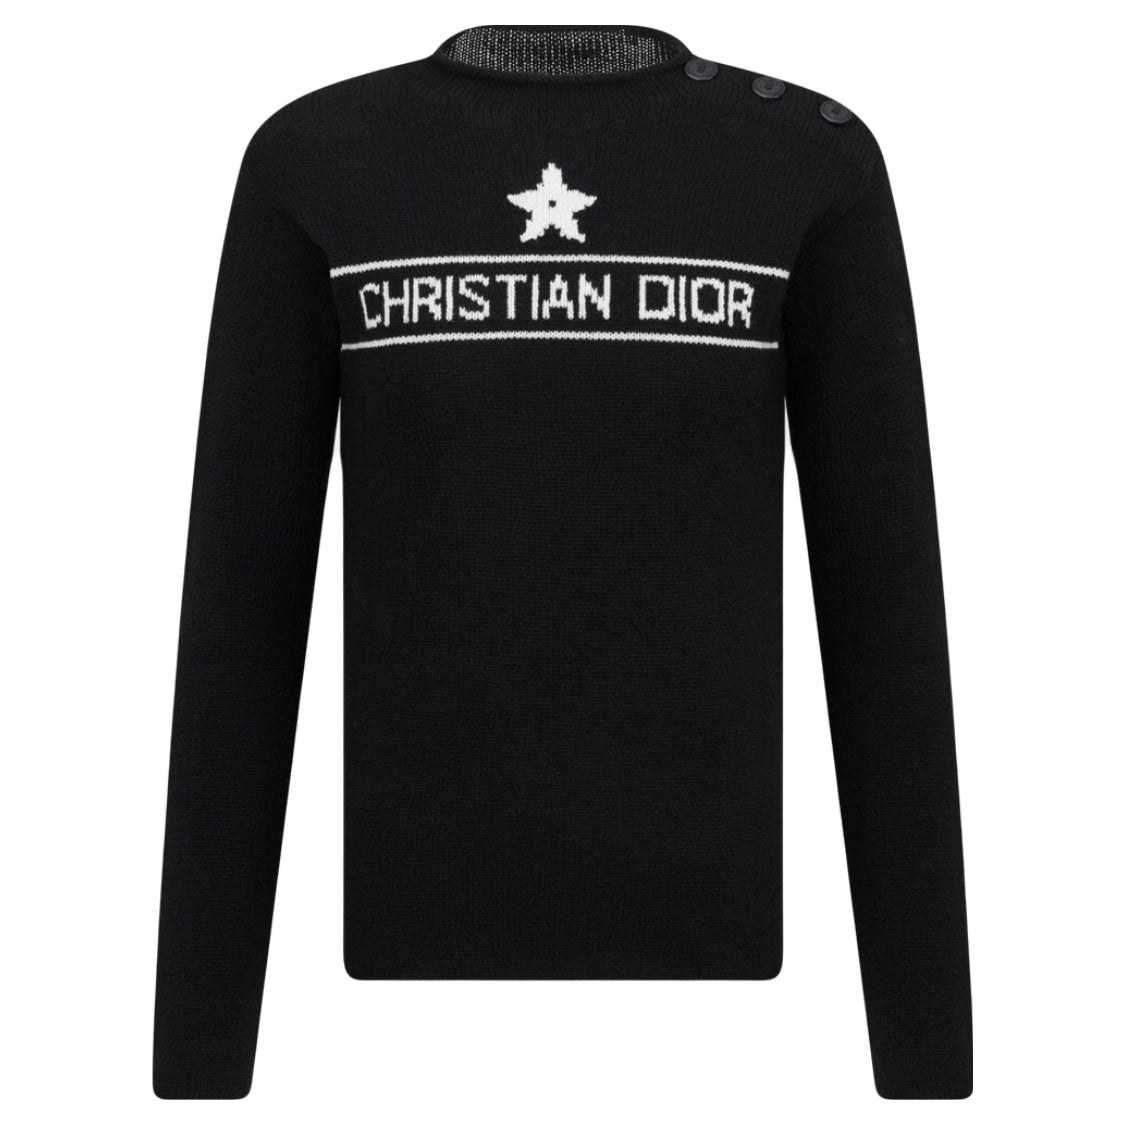 CHRISTIAN DIOR Cashmere jumper size 6uk * Current collection* RRP: £1900